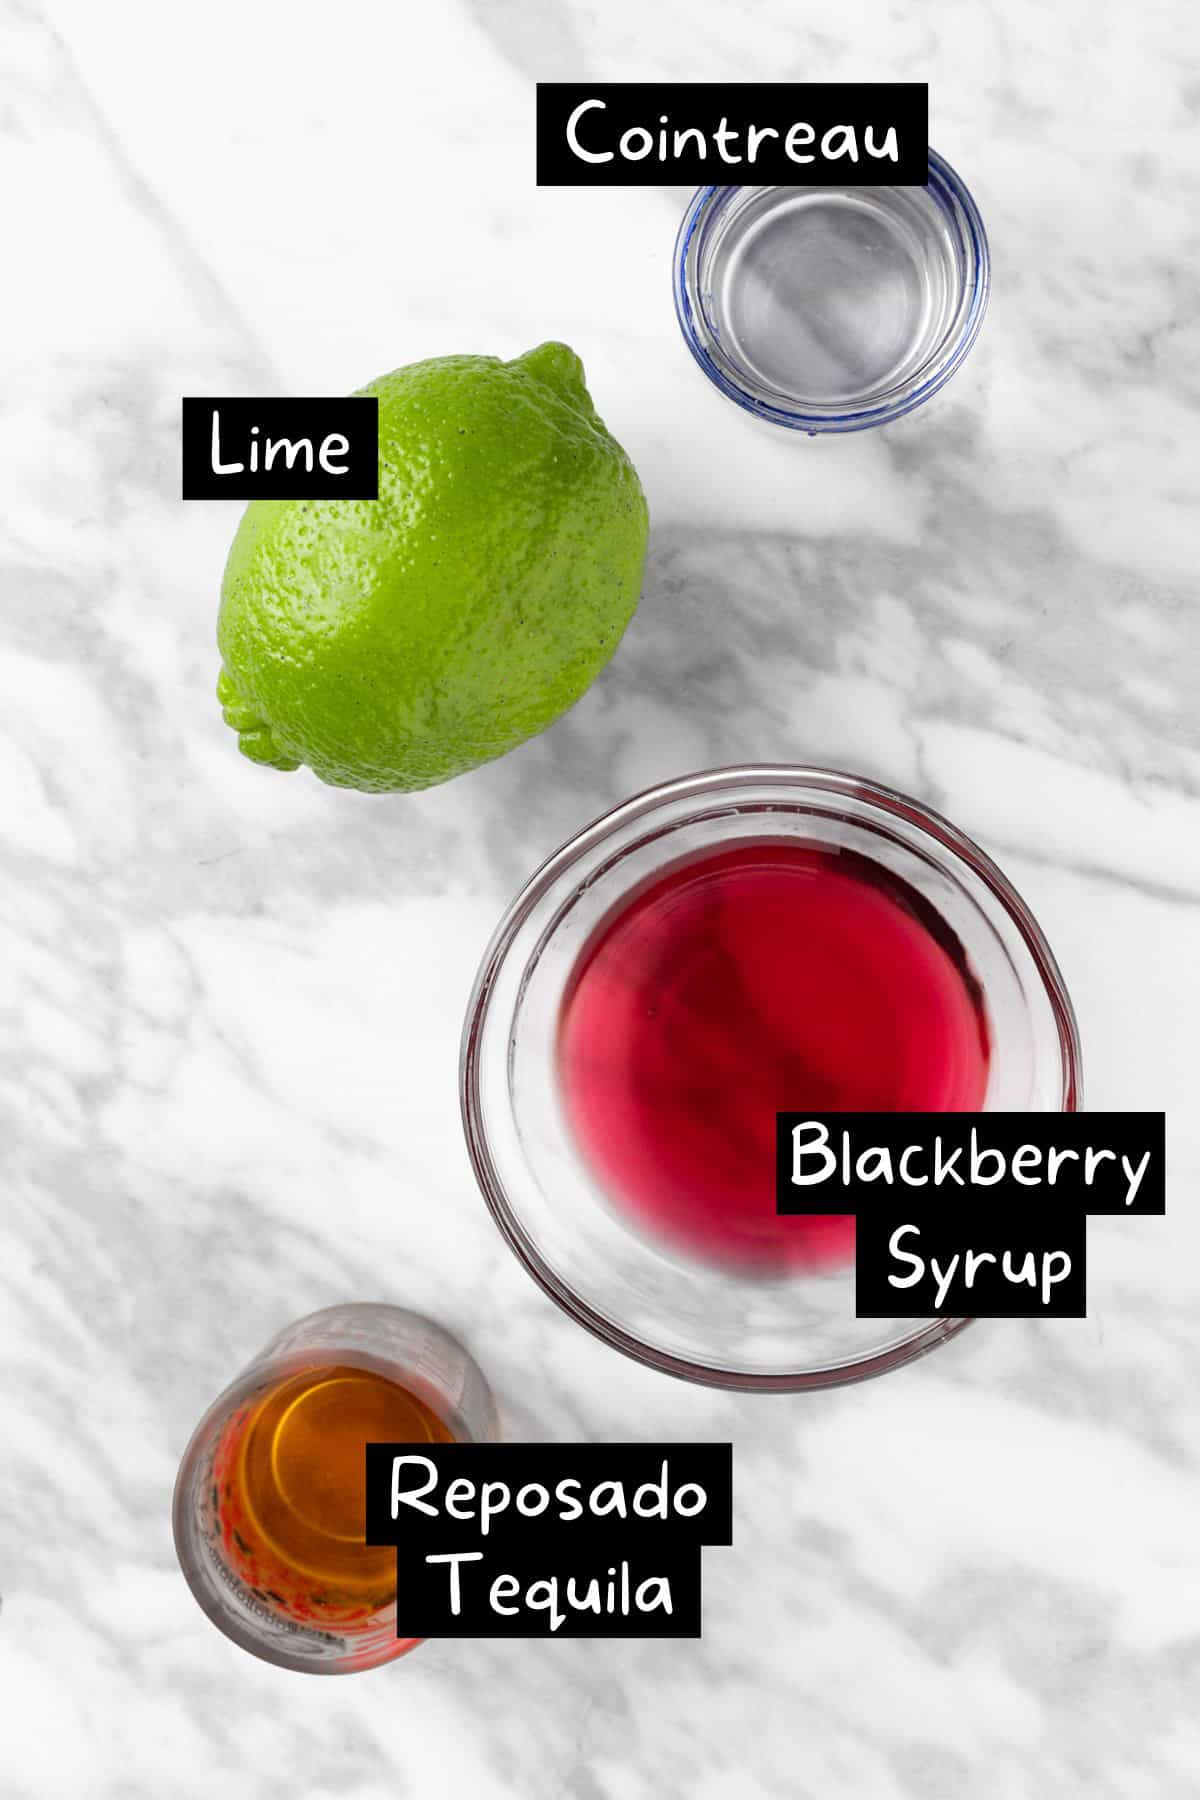 The ingredients needed for the blackberry margarita.